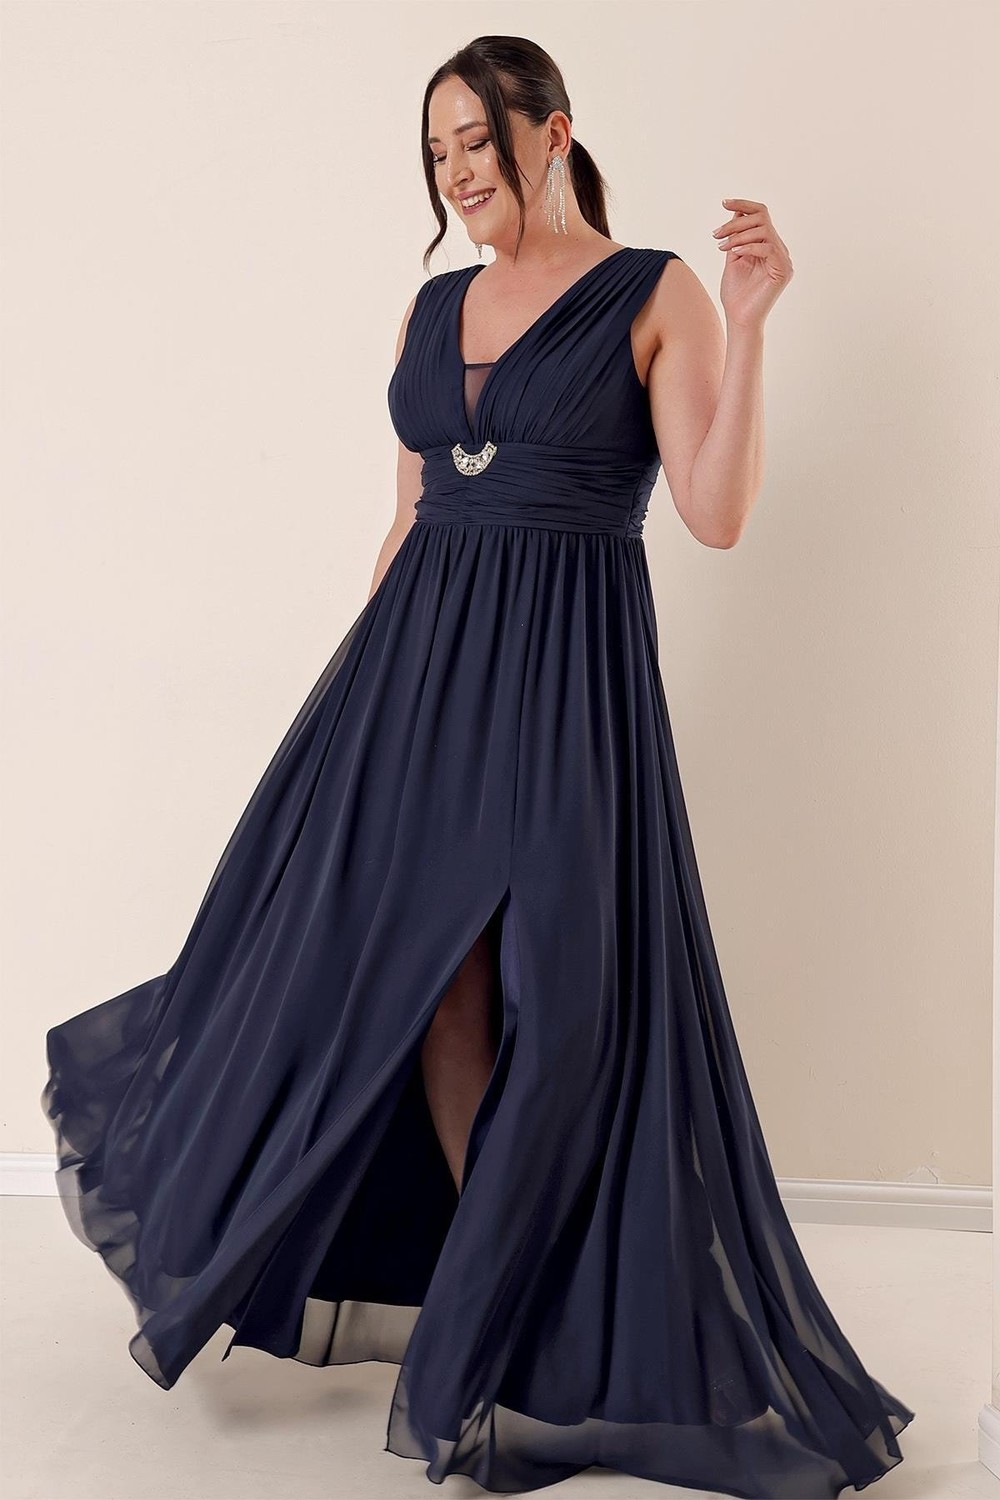 By Saygı Front Back V-Neck Stone Detailed Waist Draped Lined Plus Size Chiffon Long Dress with a Front Slit Navy Blue.